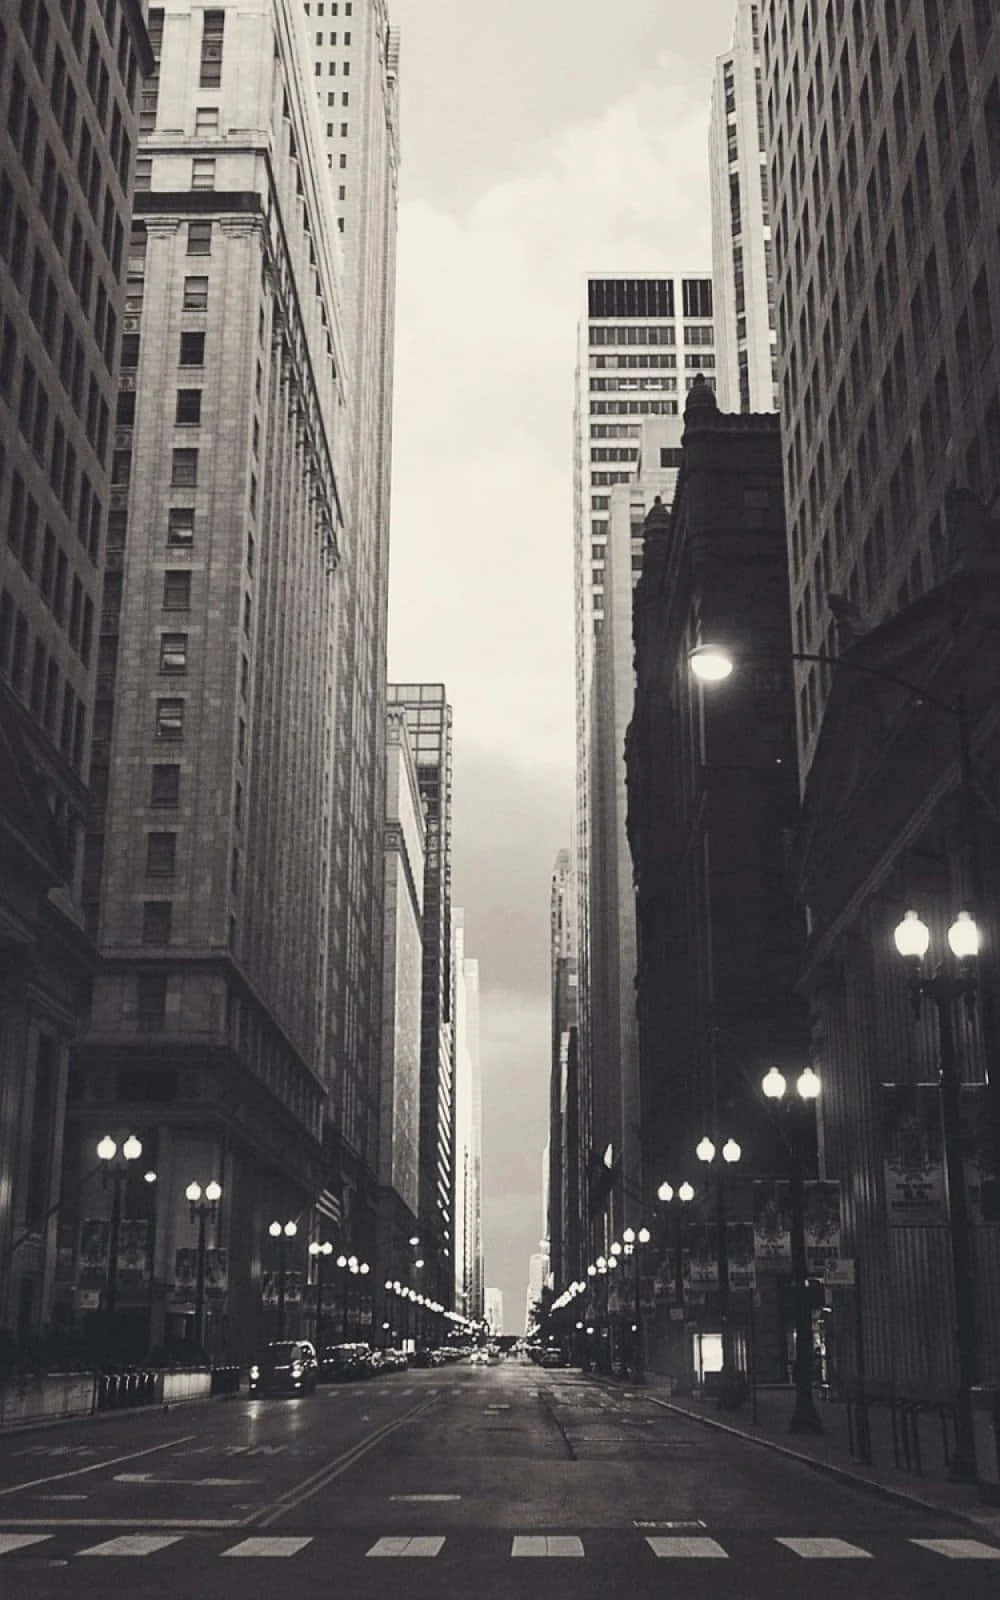 A Black And White Photo Of A City Street